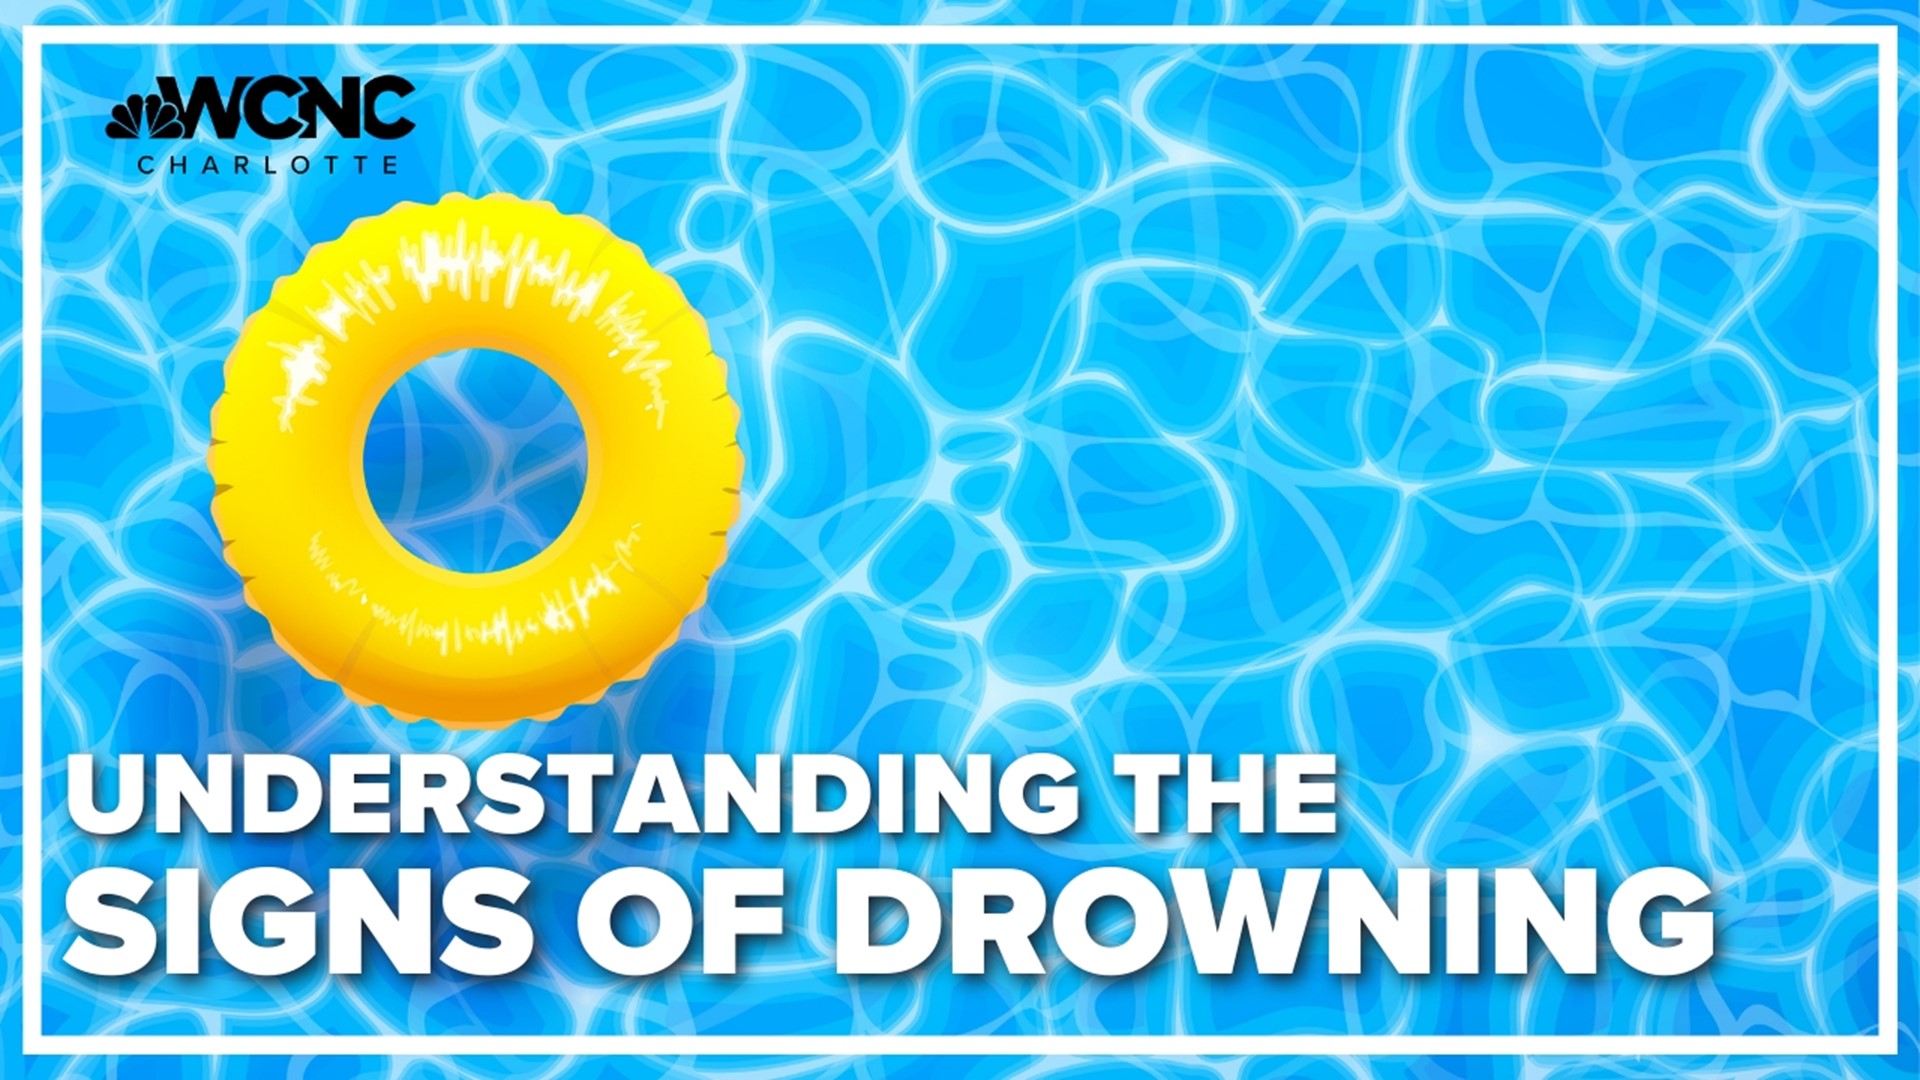 Doctors urge parents, guardians to know signs of drowning amid lifeguard shortages this summer